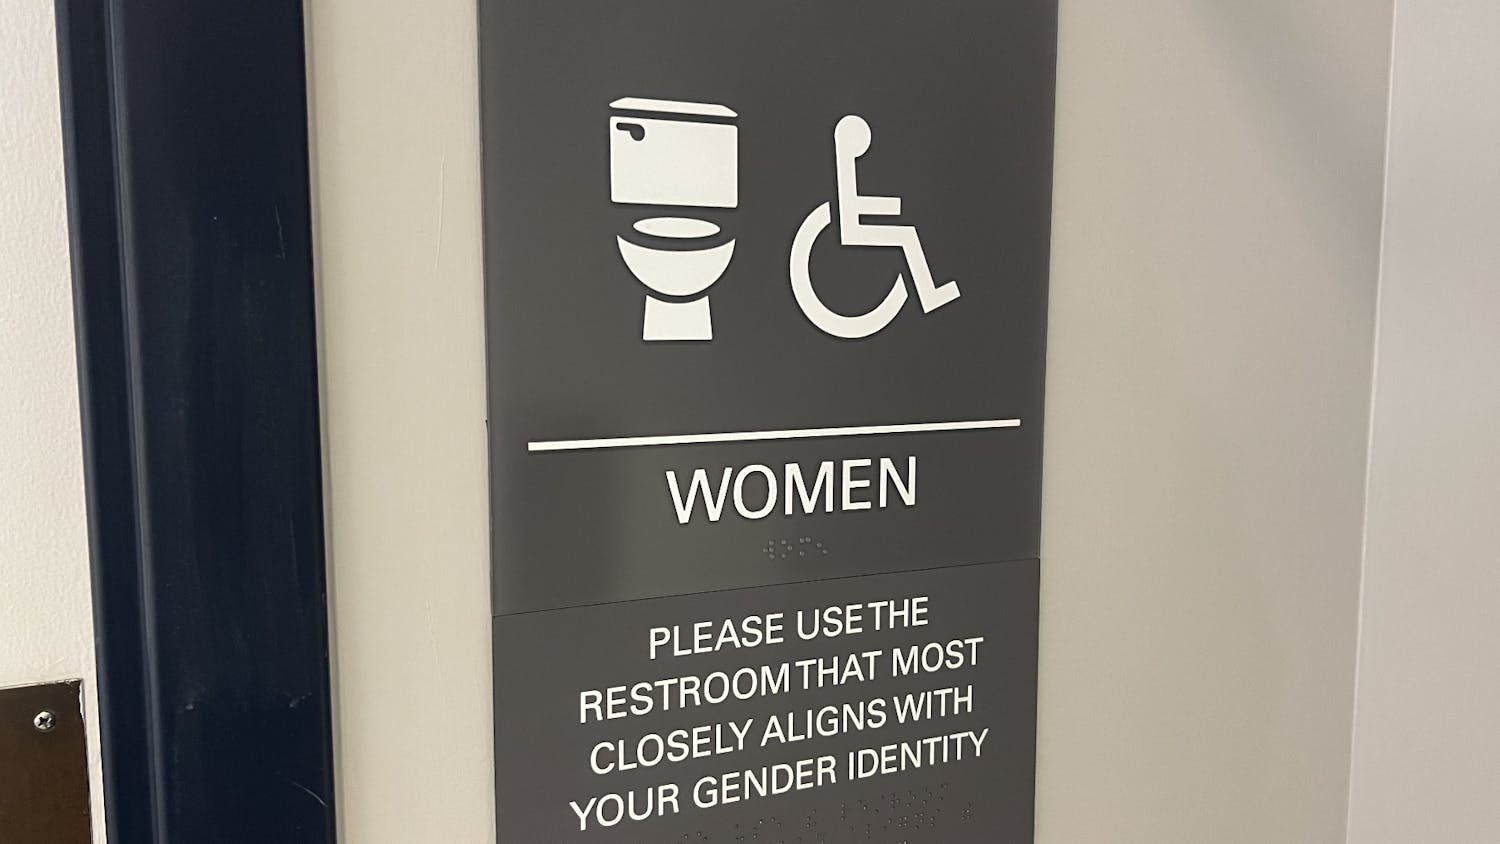 A group organized by College Planning collaborated to bring more inclusive bathroom signs to some academic buildings (Photo by Elizabeth Gladstone / Multimedia Coordinator).